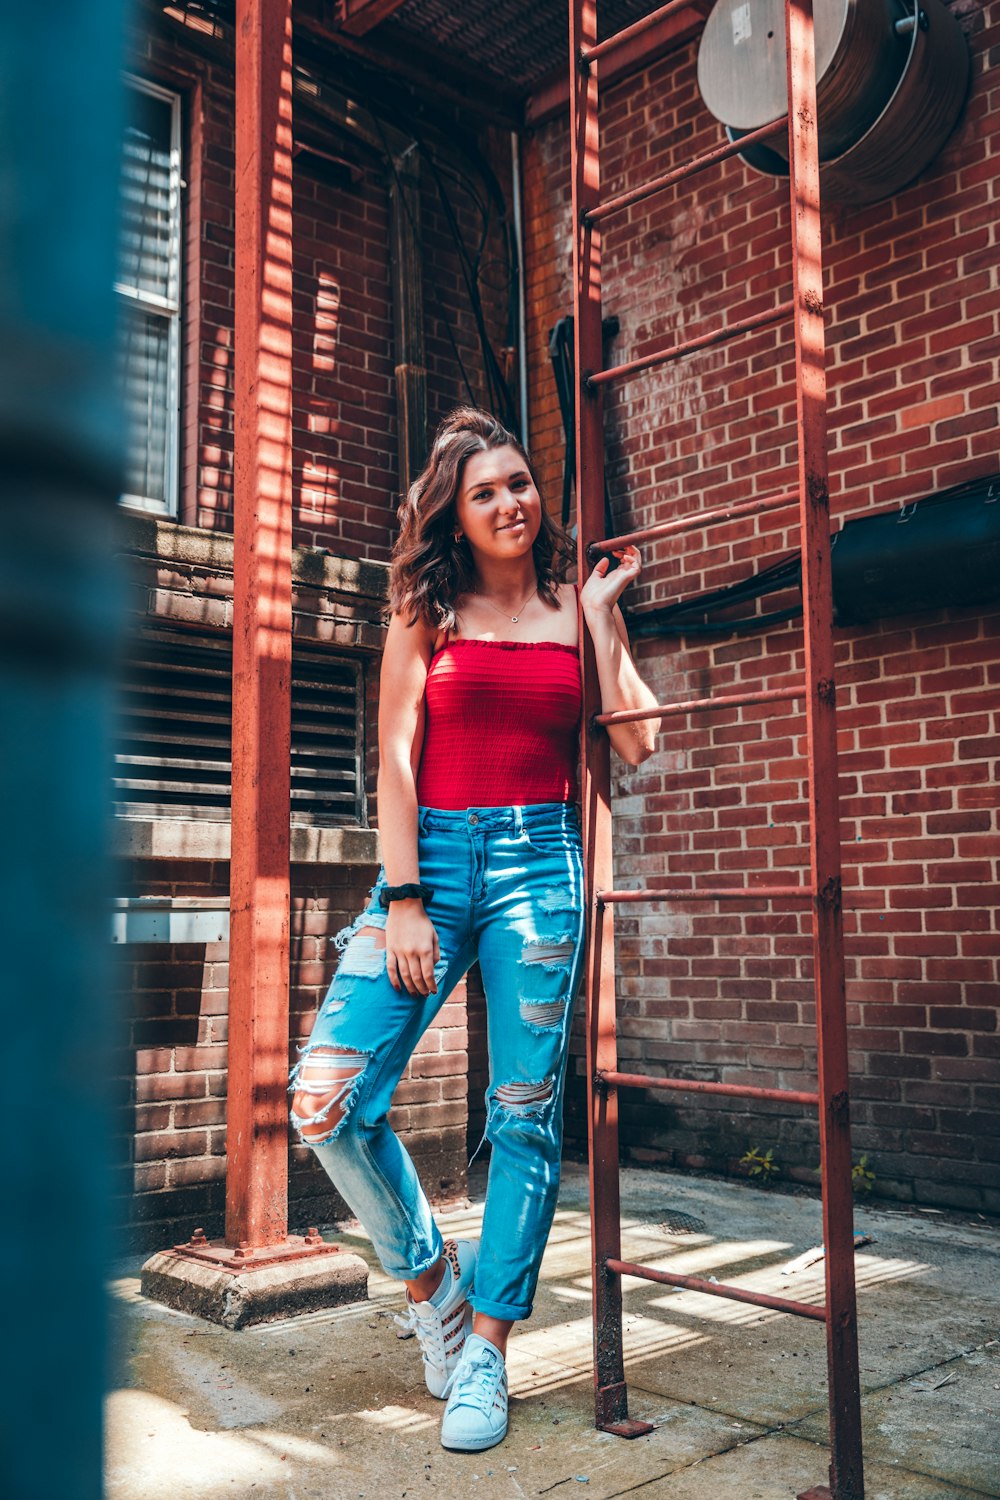 Standing woman in red shirt and blue denim jeans holding onto ladder photo  – Free Clothing Image on Unsplash